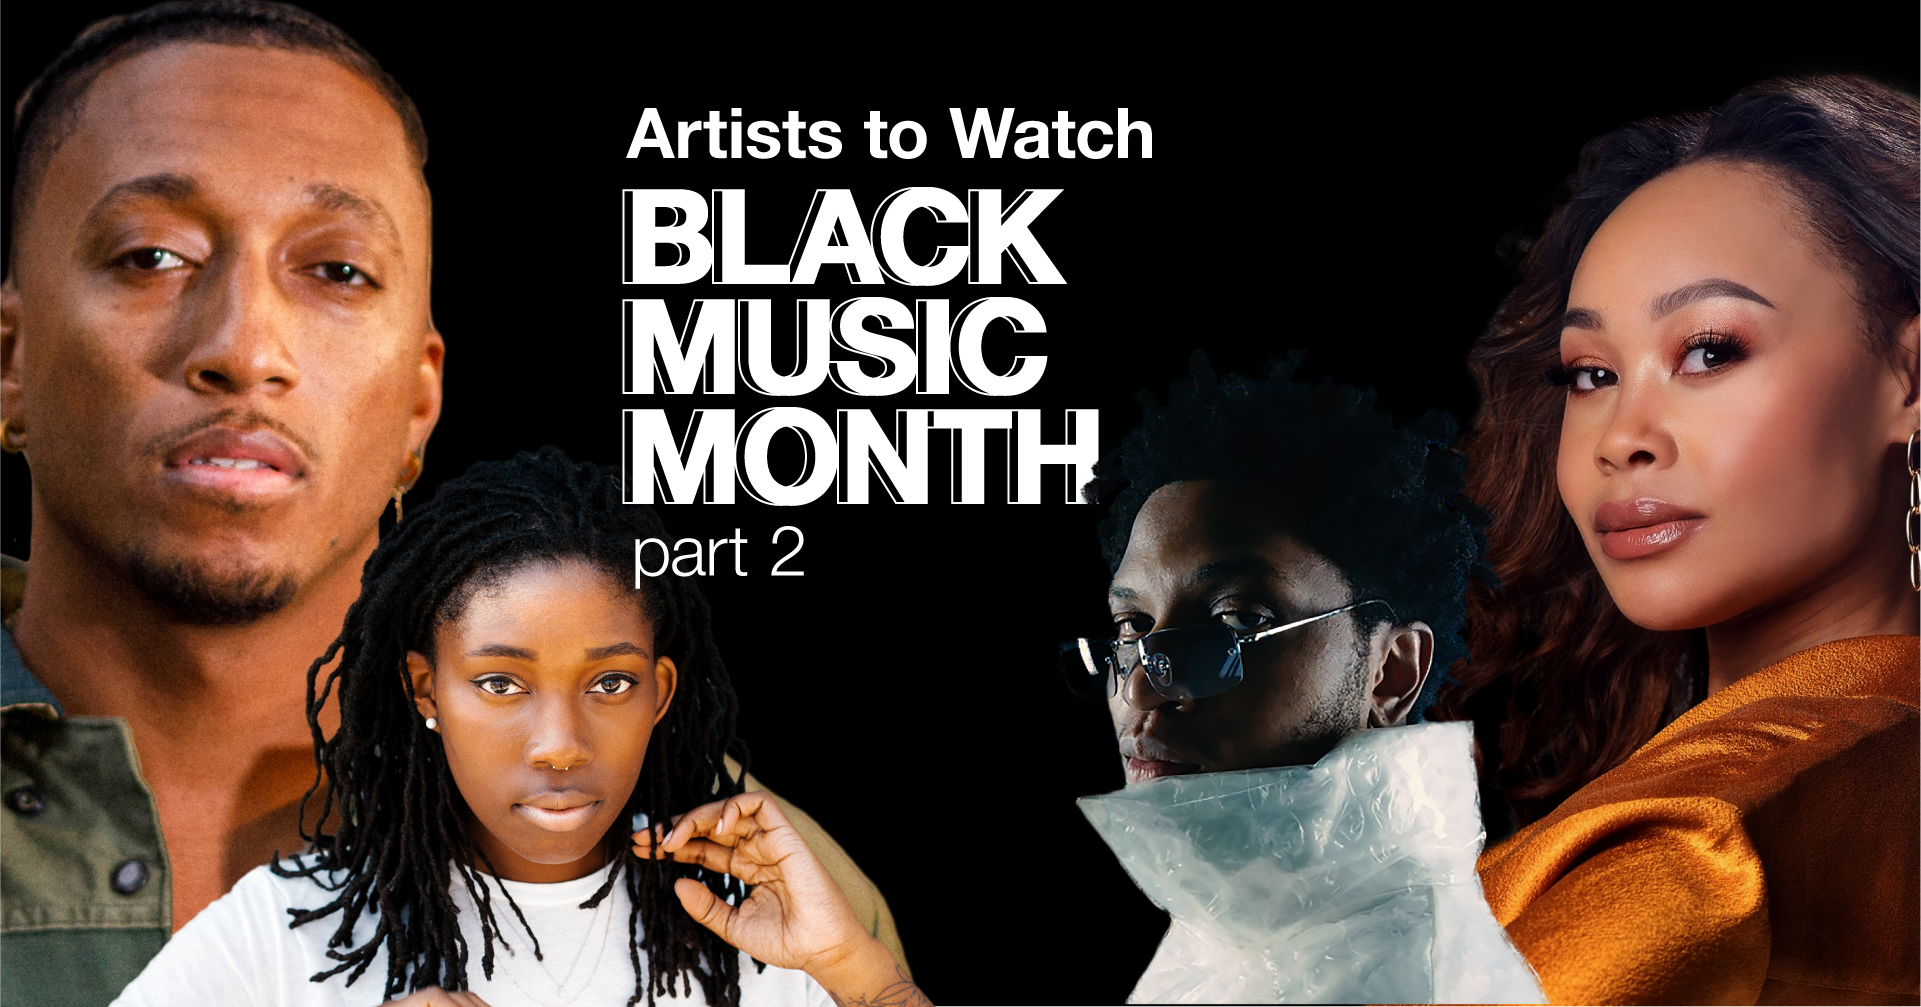 Artists to Watch: Black Music Month - Part 2